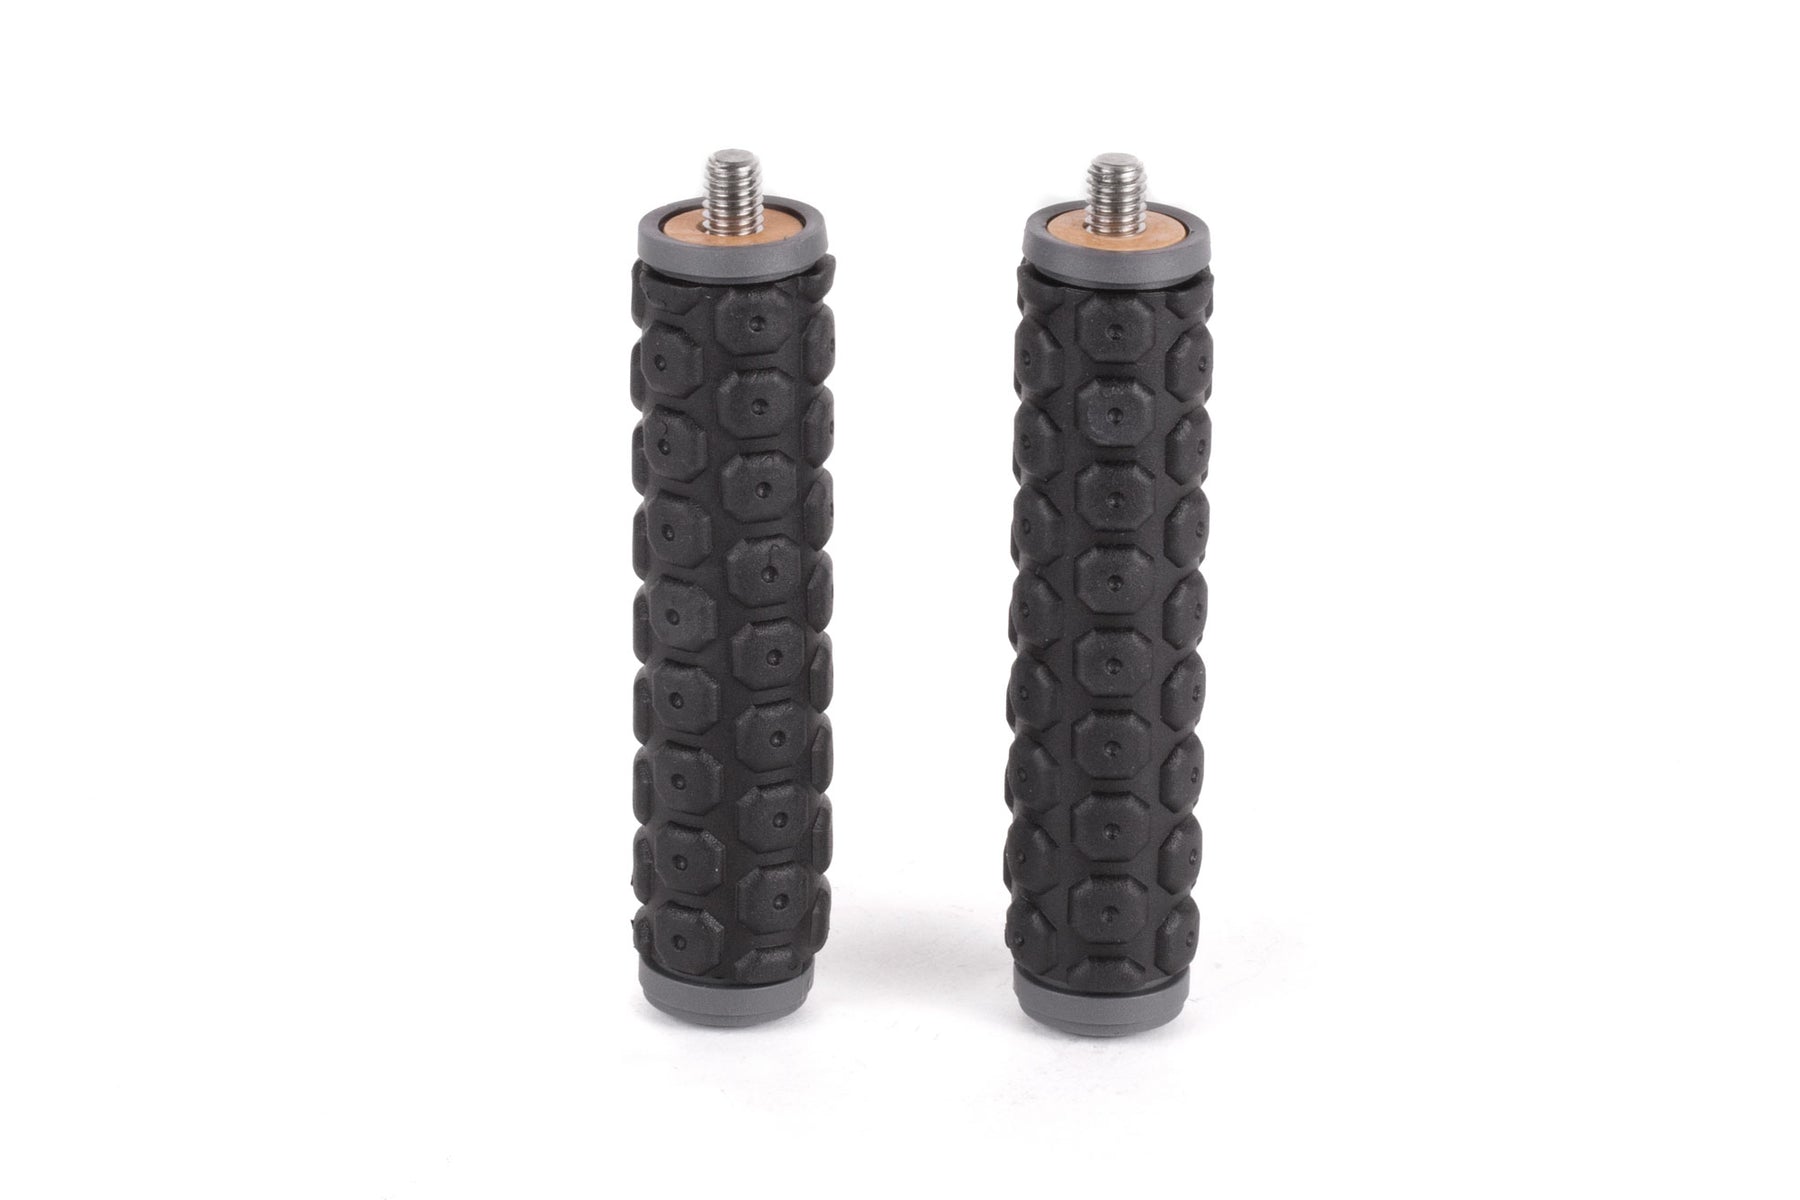 Director's Monitor Cage v2 Rubber Grip Set of Two (3/8-16 Thread)